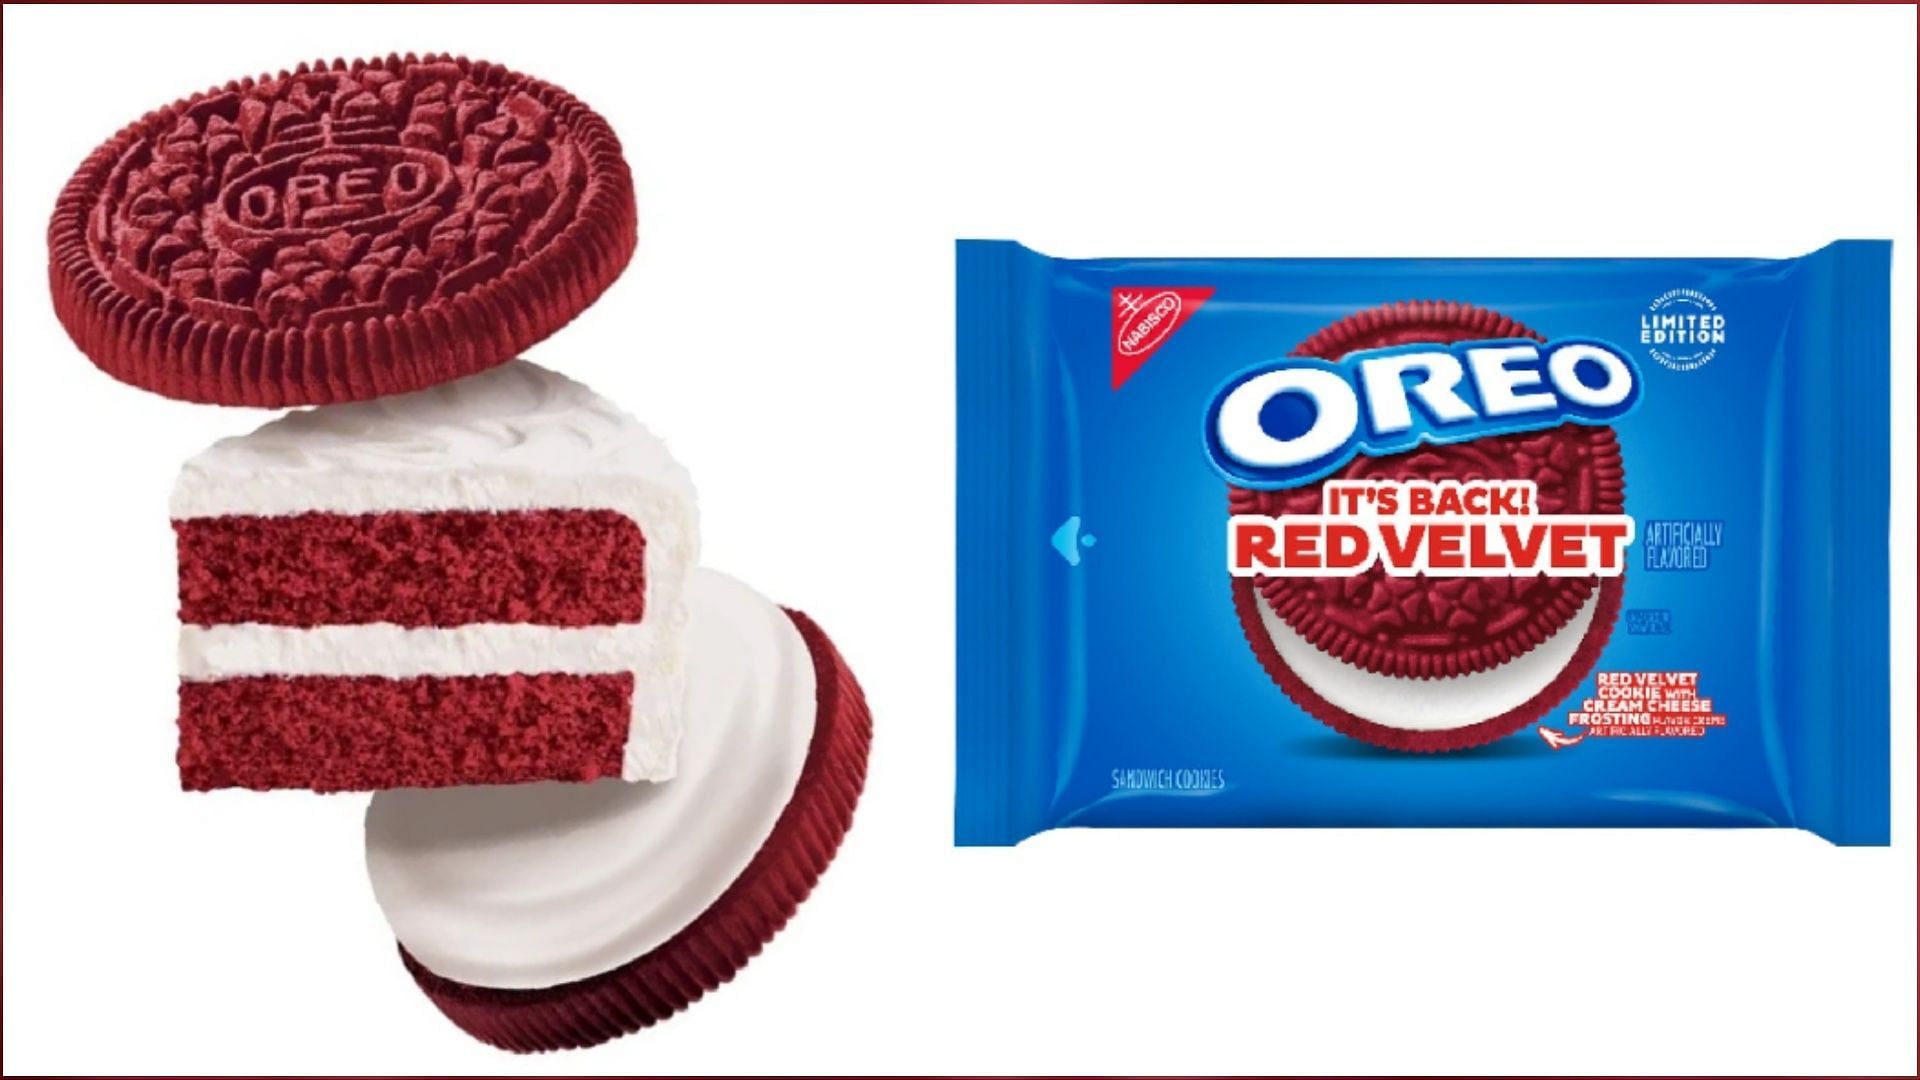 Red Velvet Oreos return to stores for a limited time (Image via Oreo)